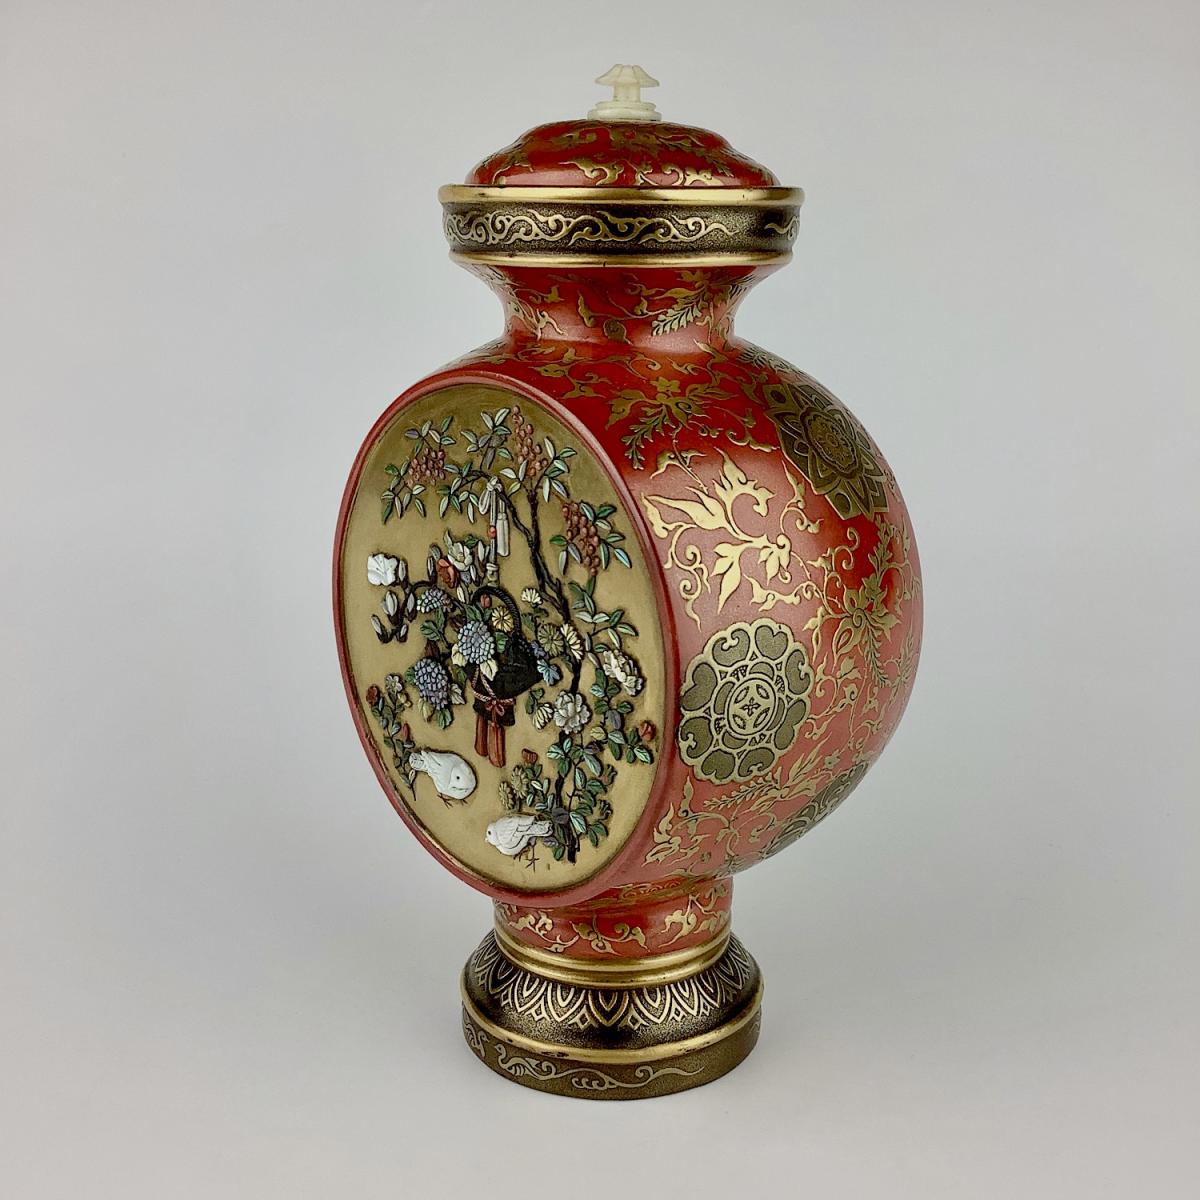 Japanese red and gold lacquer Shibayama vase, Meiji Period